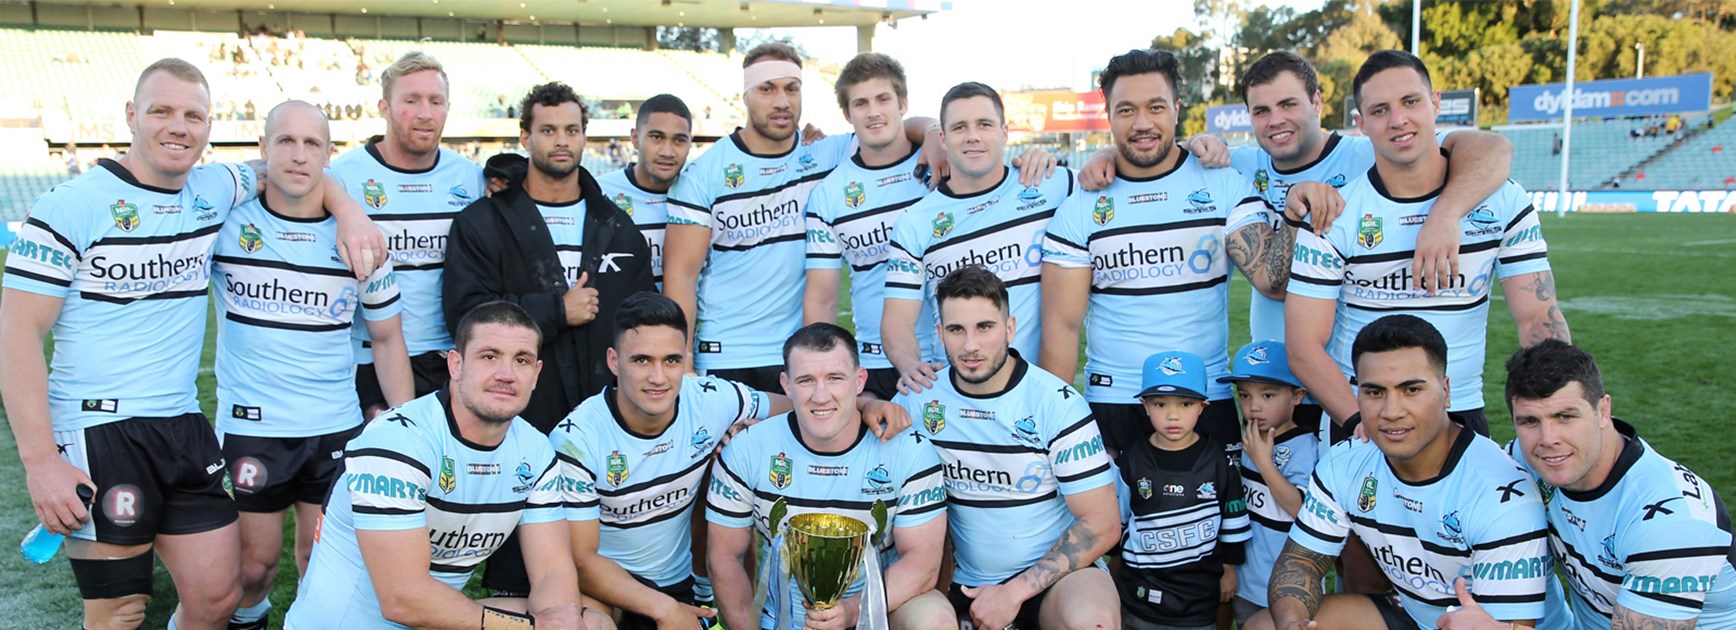 The Cronulla Sharks celebrate with the Johnny Mannah Cup after defeating Parramatta in Round 25.